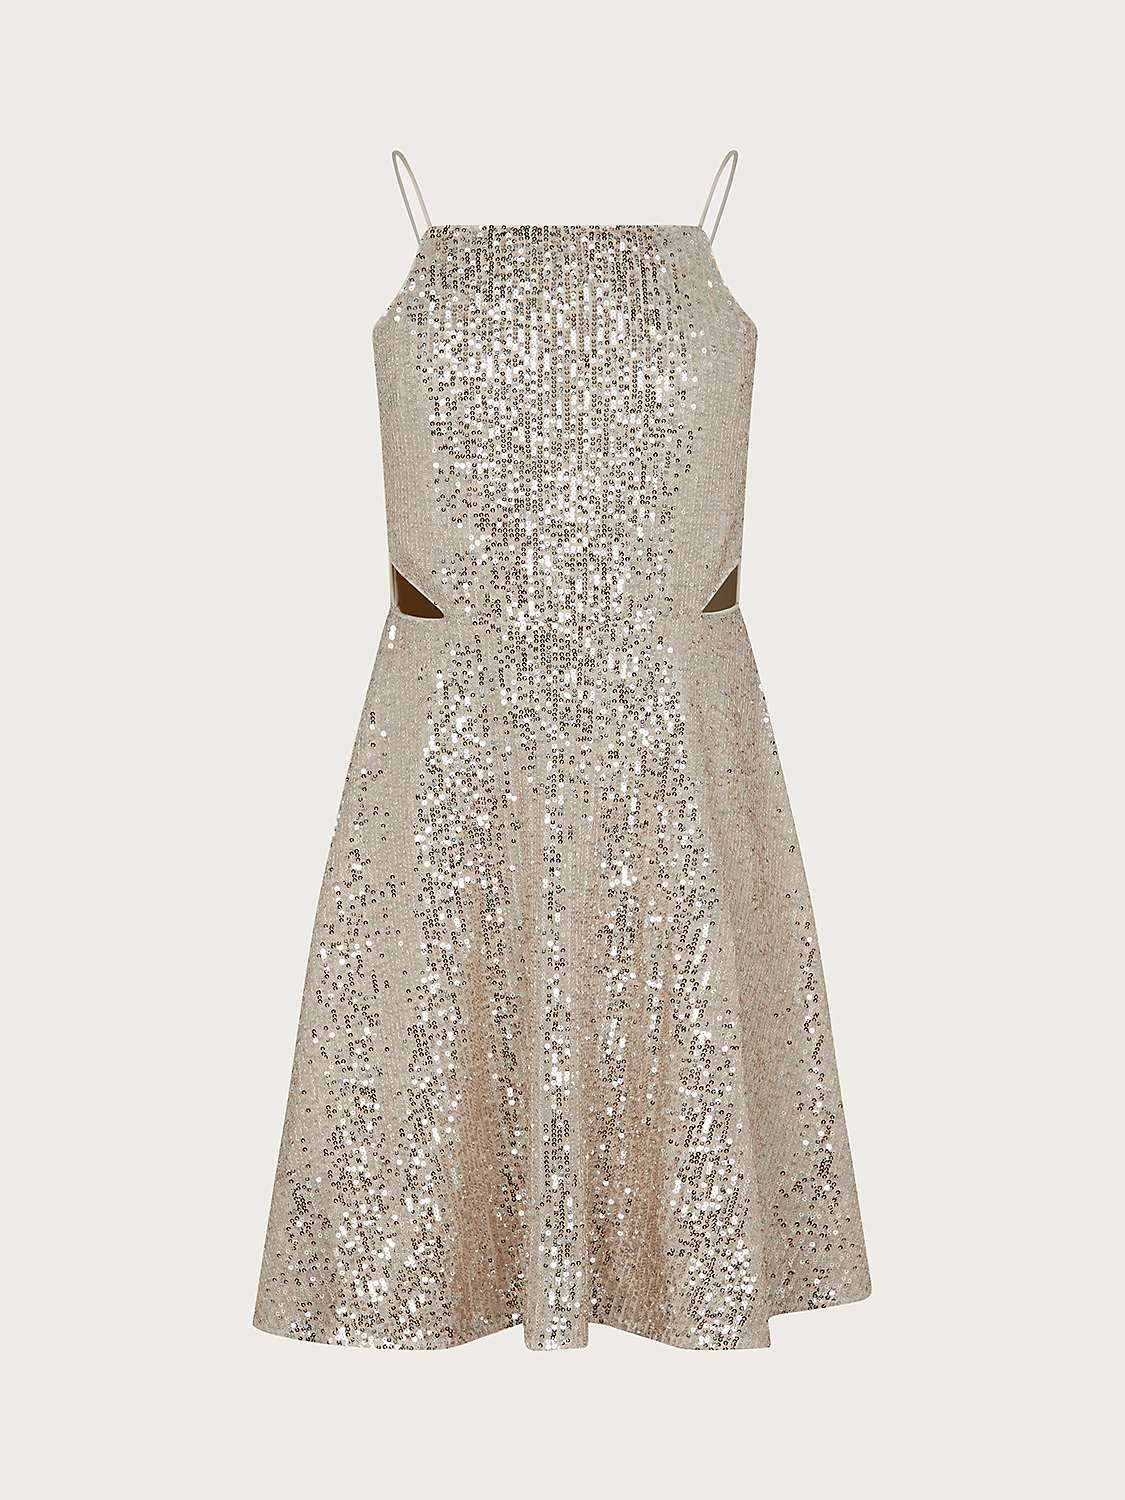 Buy Monsoon Kids' Charlotte Sequin Cut Out Party Dress, Champagne Online at johnlewis.com